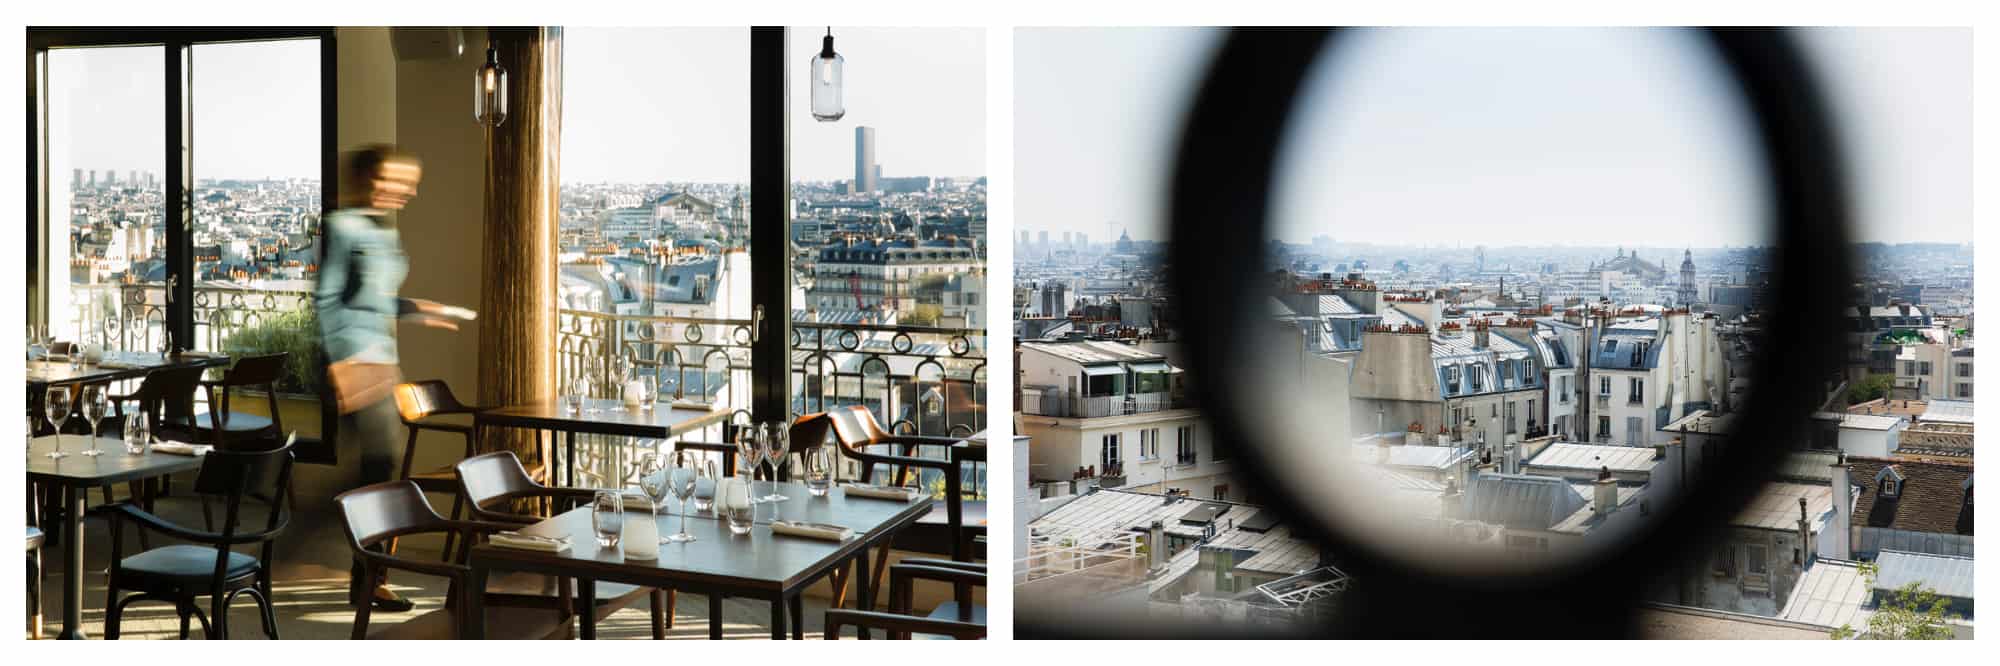 The interior of a restaurant with the blurred figure of a waiter. A view of Paris outside the windows (left). A view of Paris through a wrought iron balcony (right).